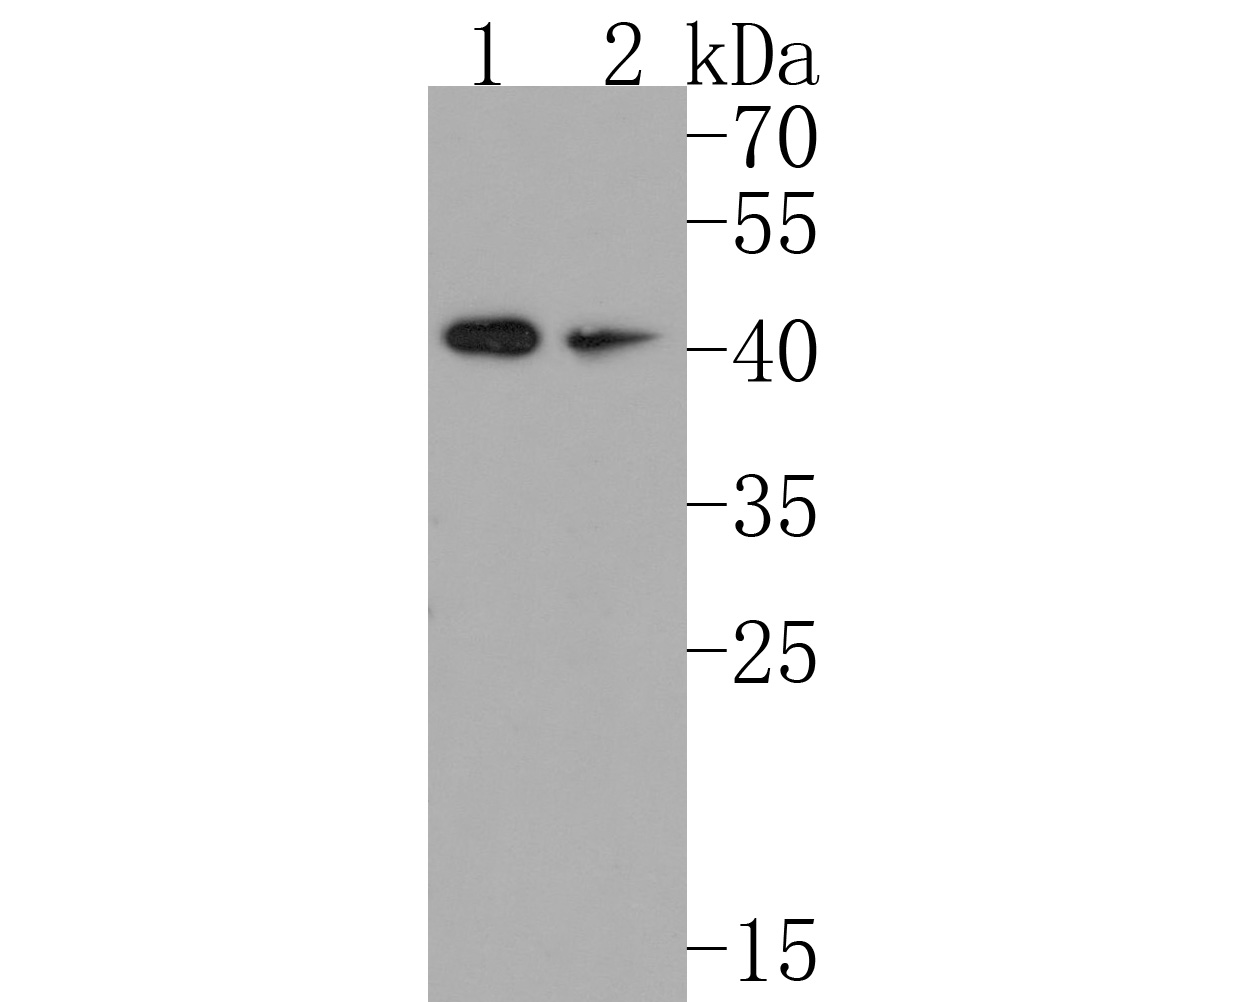 Western blot analysis of Inhibin alpha on different lysates. Proteins were transferred to a PVDF membrane and blocked with 5% BSA in PBS for 1 hour at room temperature. The primary antibody (HA500185, 1/500) was used in 5% BSA at room temperature for 2 hours. Goat Anti-Rabbit IgG - HRP Secondary Antibody (HA1001) at 1:200,000 dilution was used for 1 hour at room temperature.<br />
Positive control: <br />
Lane 1: Mouse testis tissue lysate<br />
Lane 2: PANC-1 cell lysate